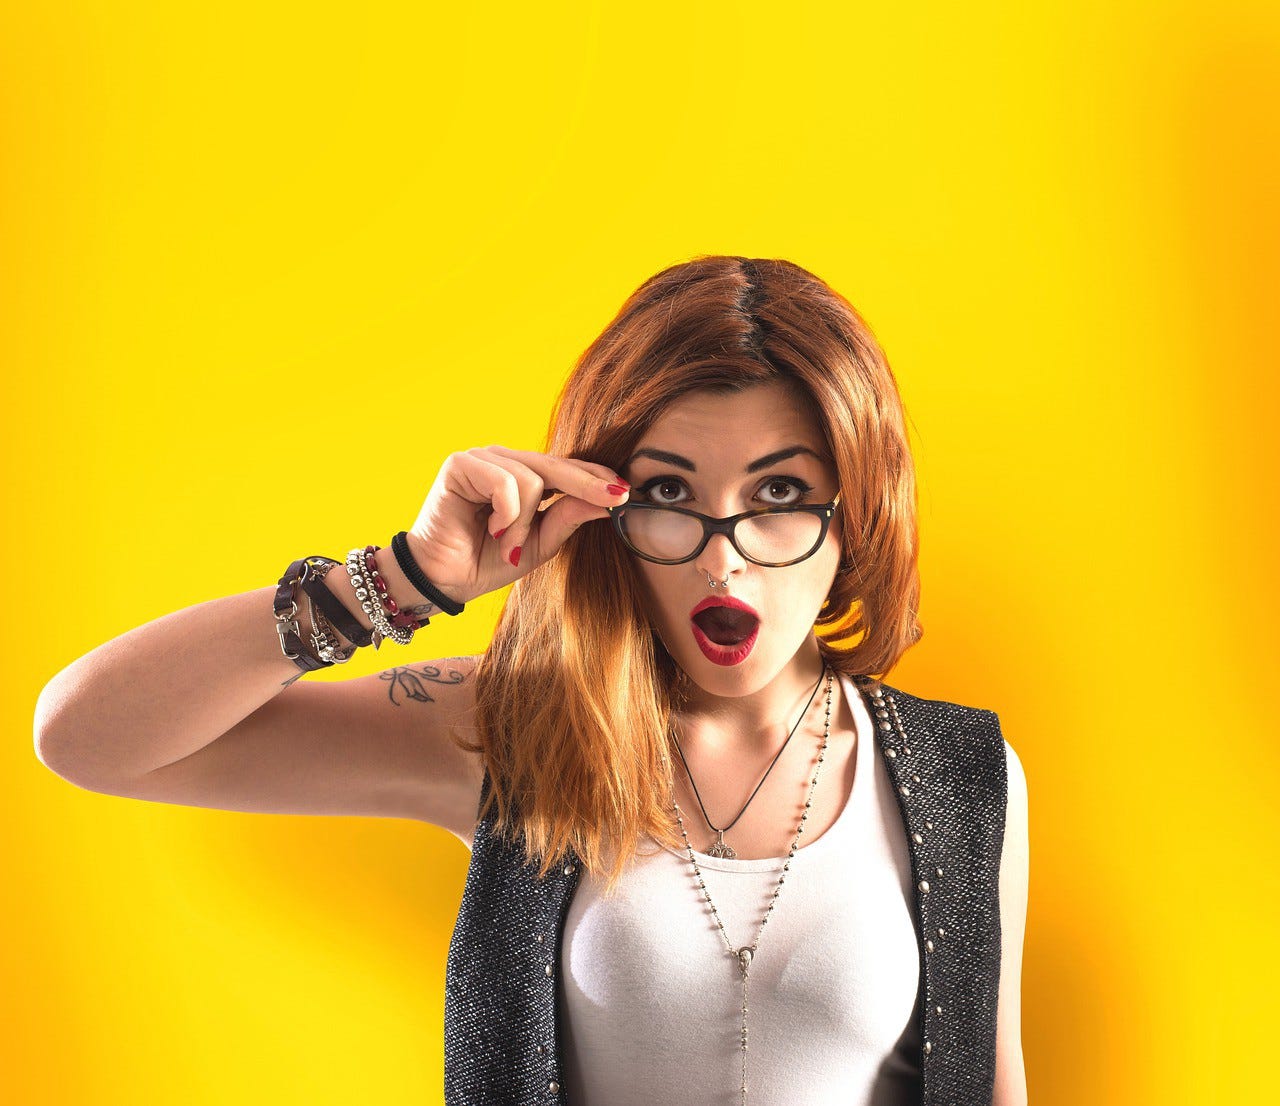 A red-haired woman wearing glasses in front of a yellow background, looking astonished